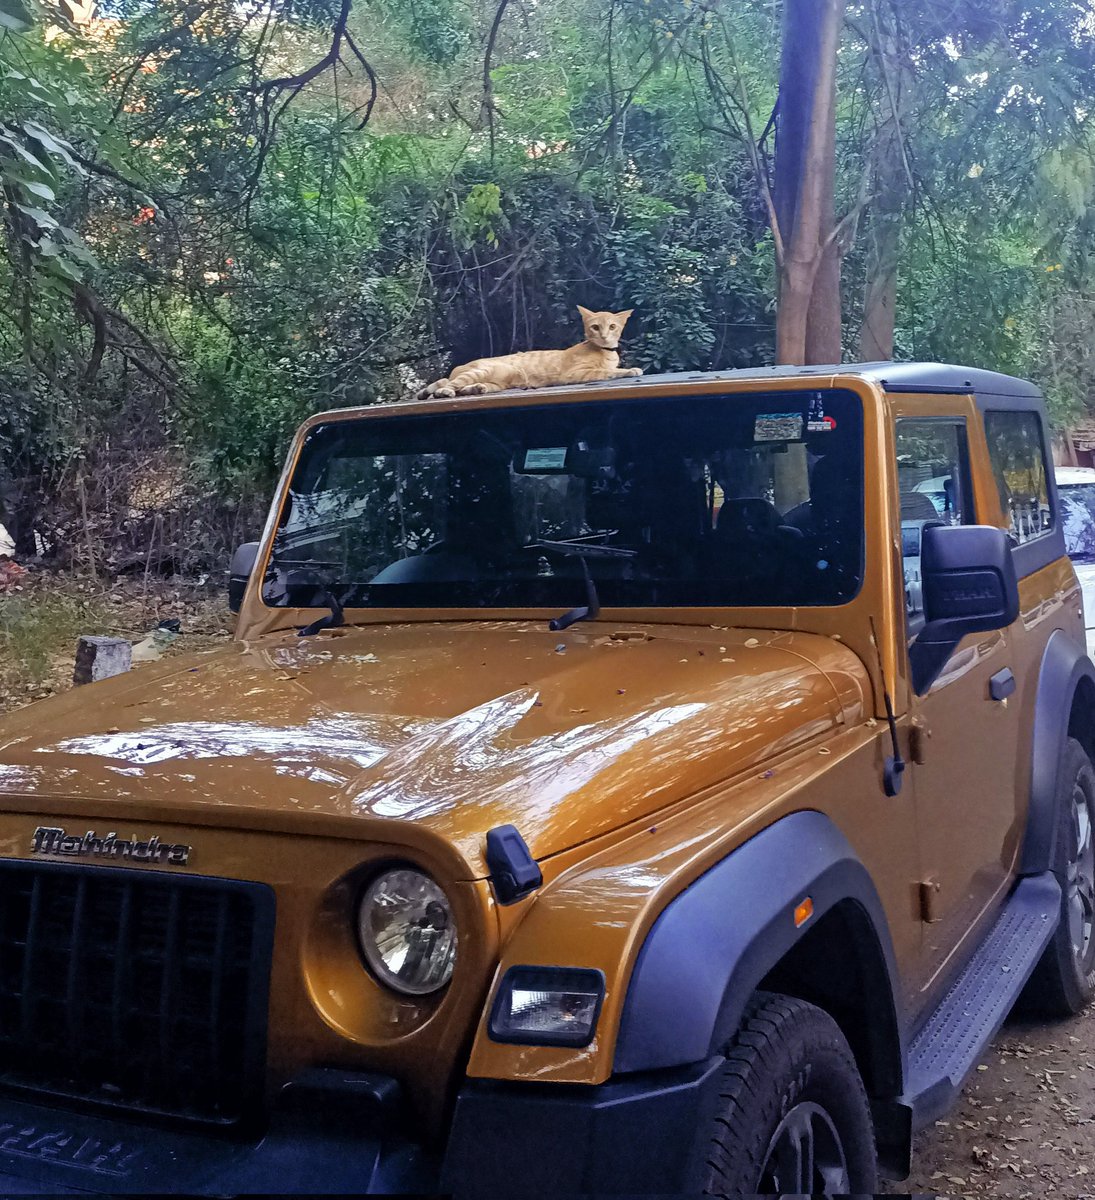 Neighbour's cat be living the life! With excellent taste, nevertheless! ❤️

#mahindrathar
@anandmahindra